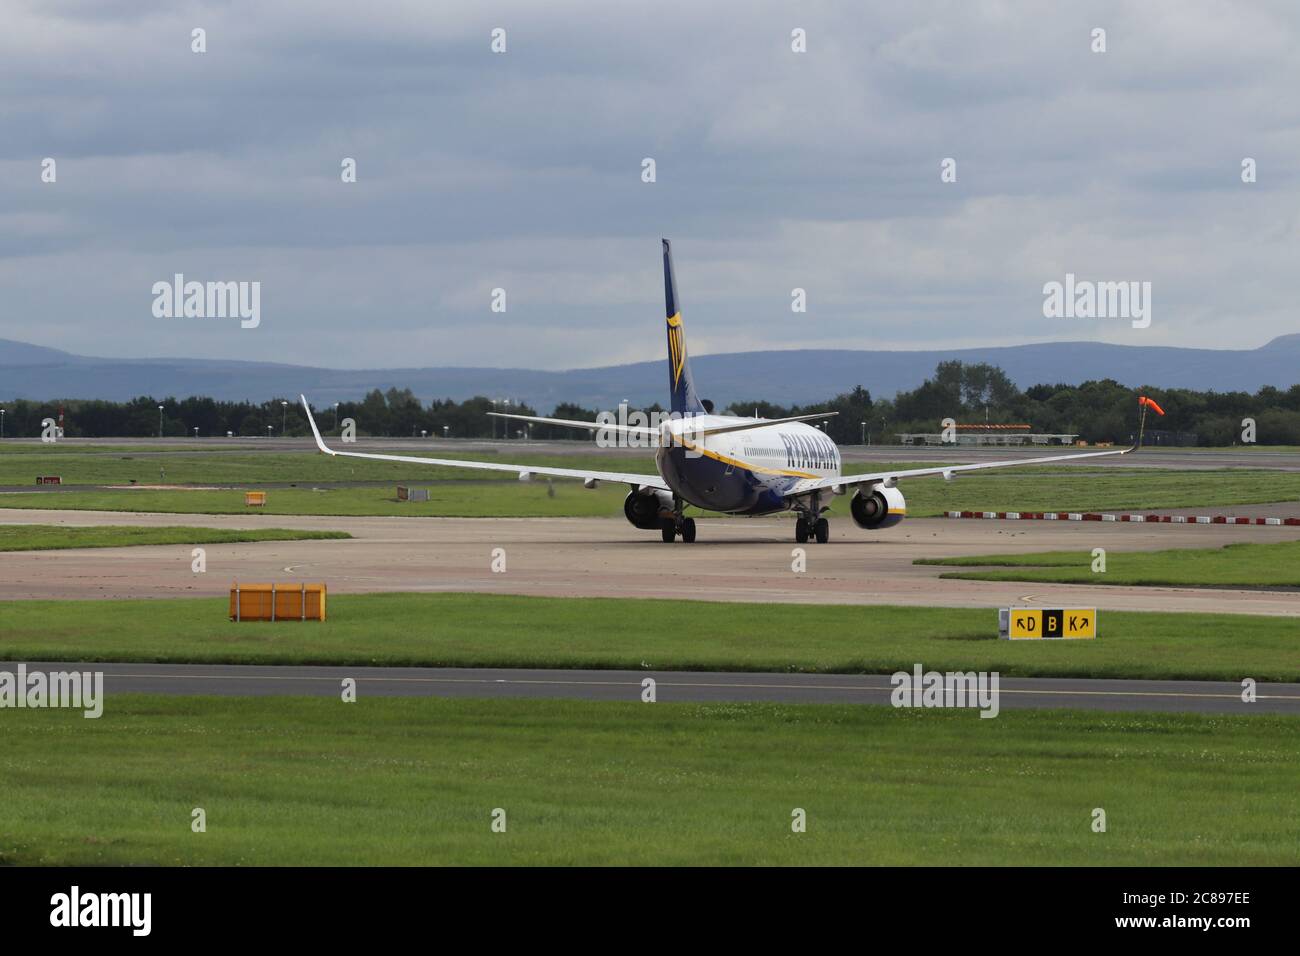 Ryanair Boeing 737-800 aircraft at Manchester airport, Runway views park  Credit : Mike Clarke / Alamy Stock Photos Stock Photo - Alamy